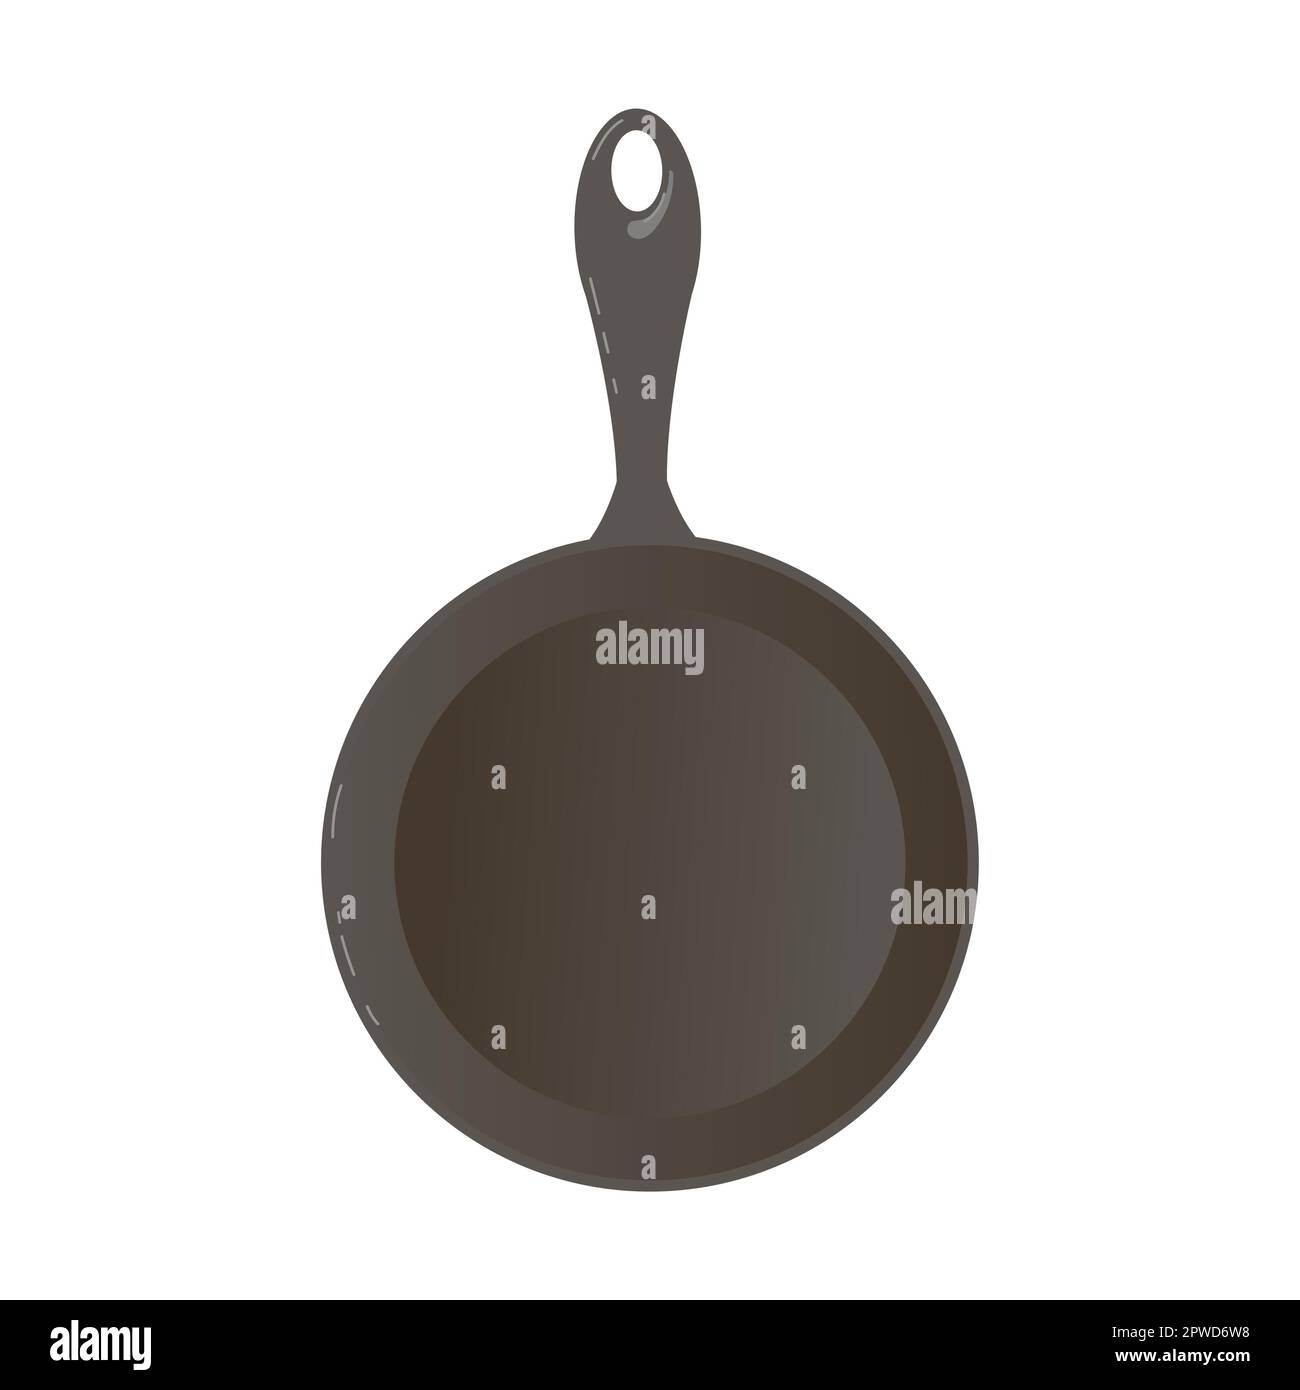 https://c8.alamy.com/comp/2PWD6W8/kitchen-pan-utensil-and-tool-vector-illustration-of-accessory-for-cooking-frying-or-eating-food-cartoon-isolated-on-white-2PWD6W8.jpg